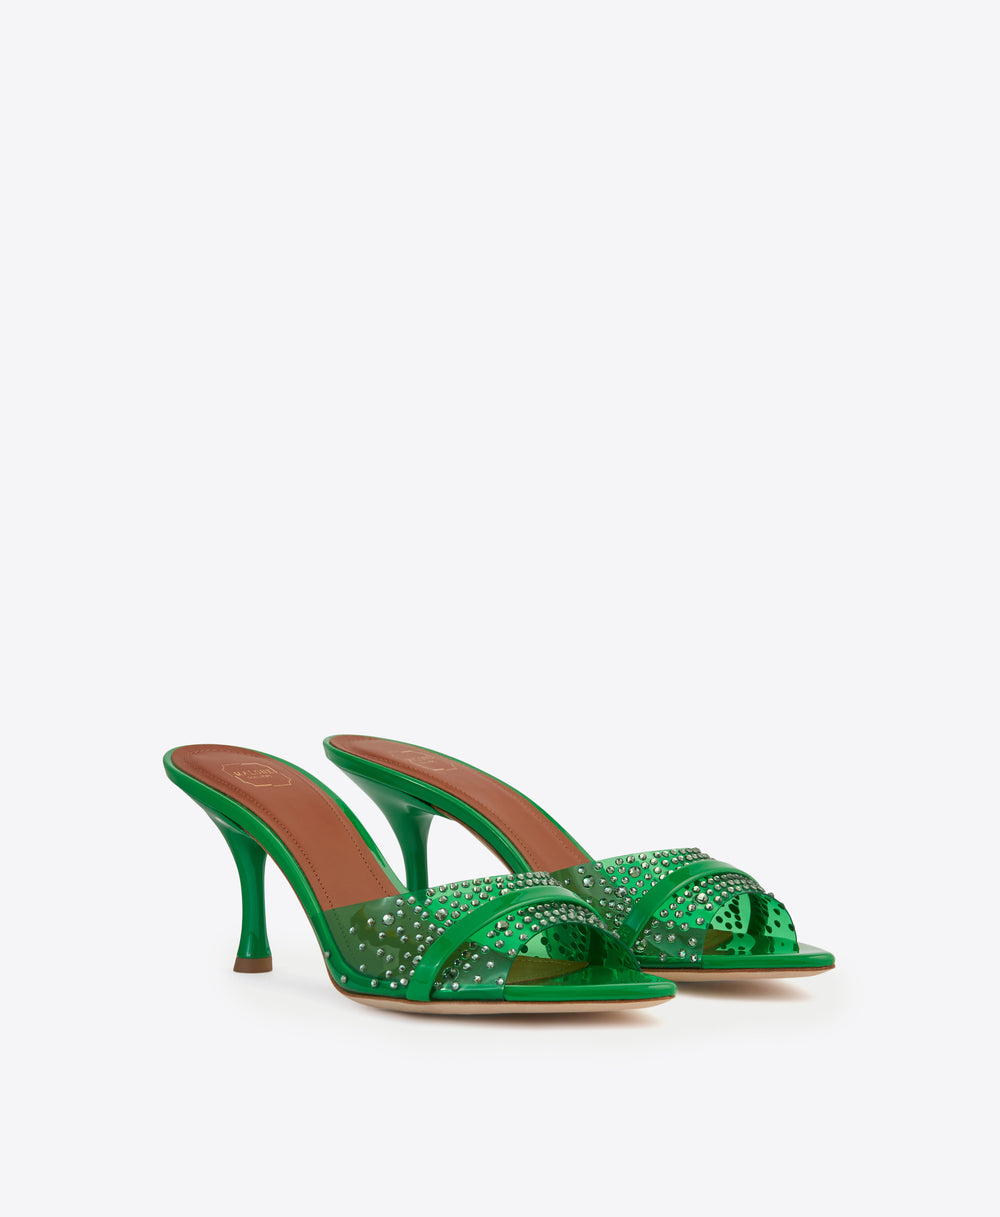 Women's Green PVC with Crystals Heeled Sandals Malone Souliers